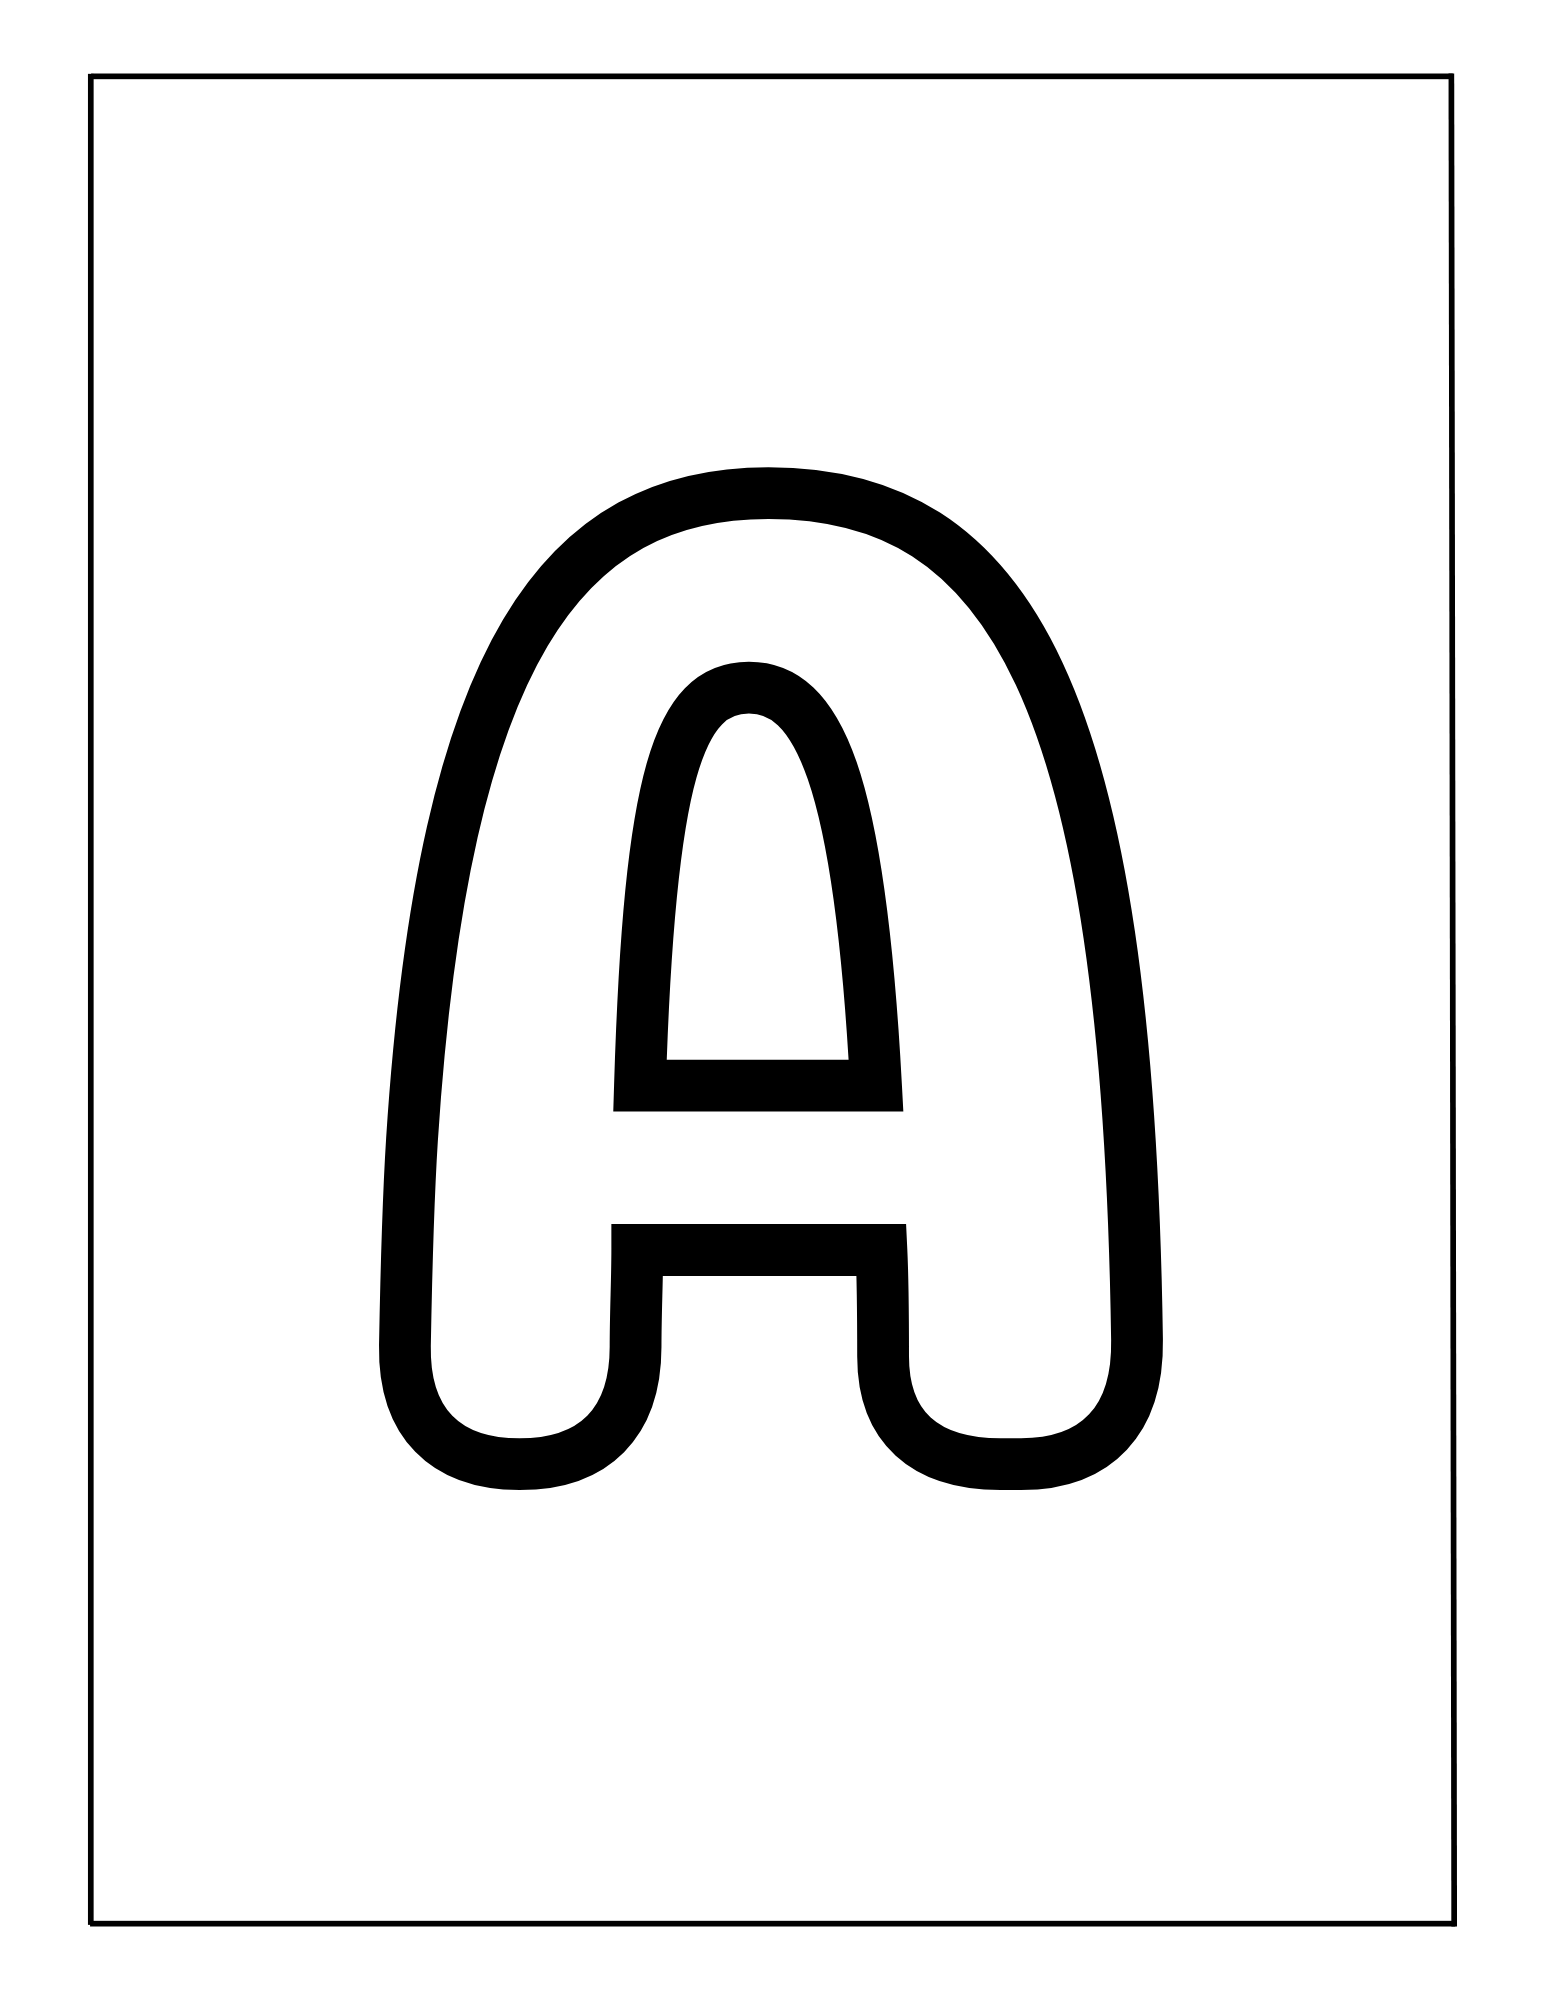 Alphabet Coloring Pages A Z Free Printable - Free Printable Alphabet Letters To Color